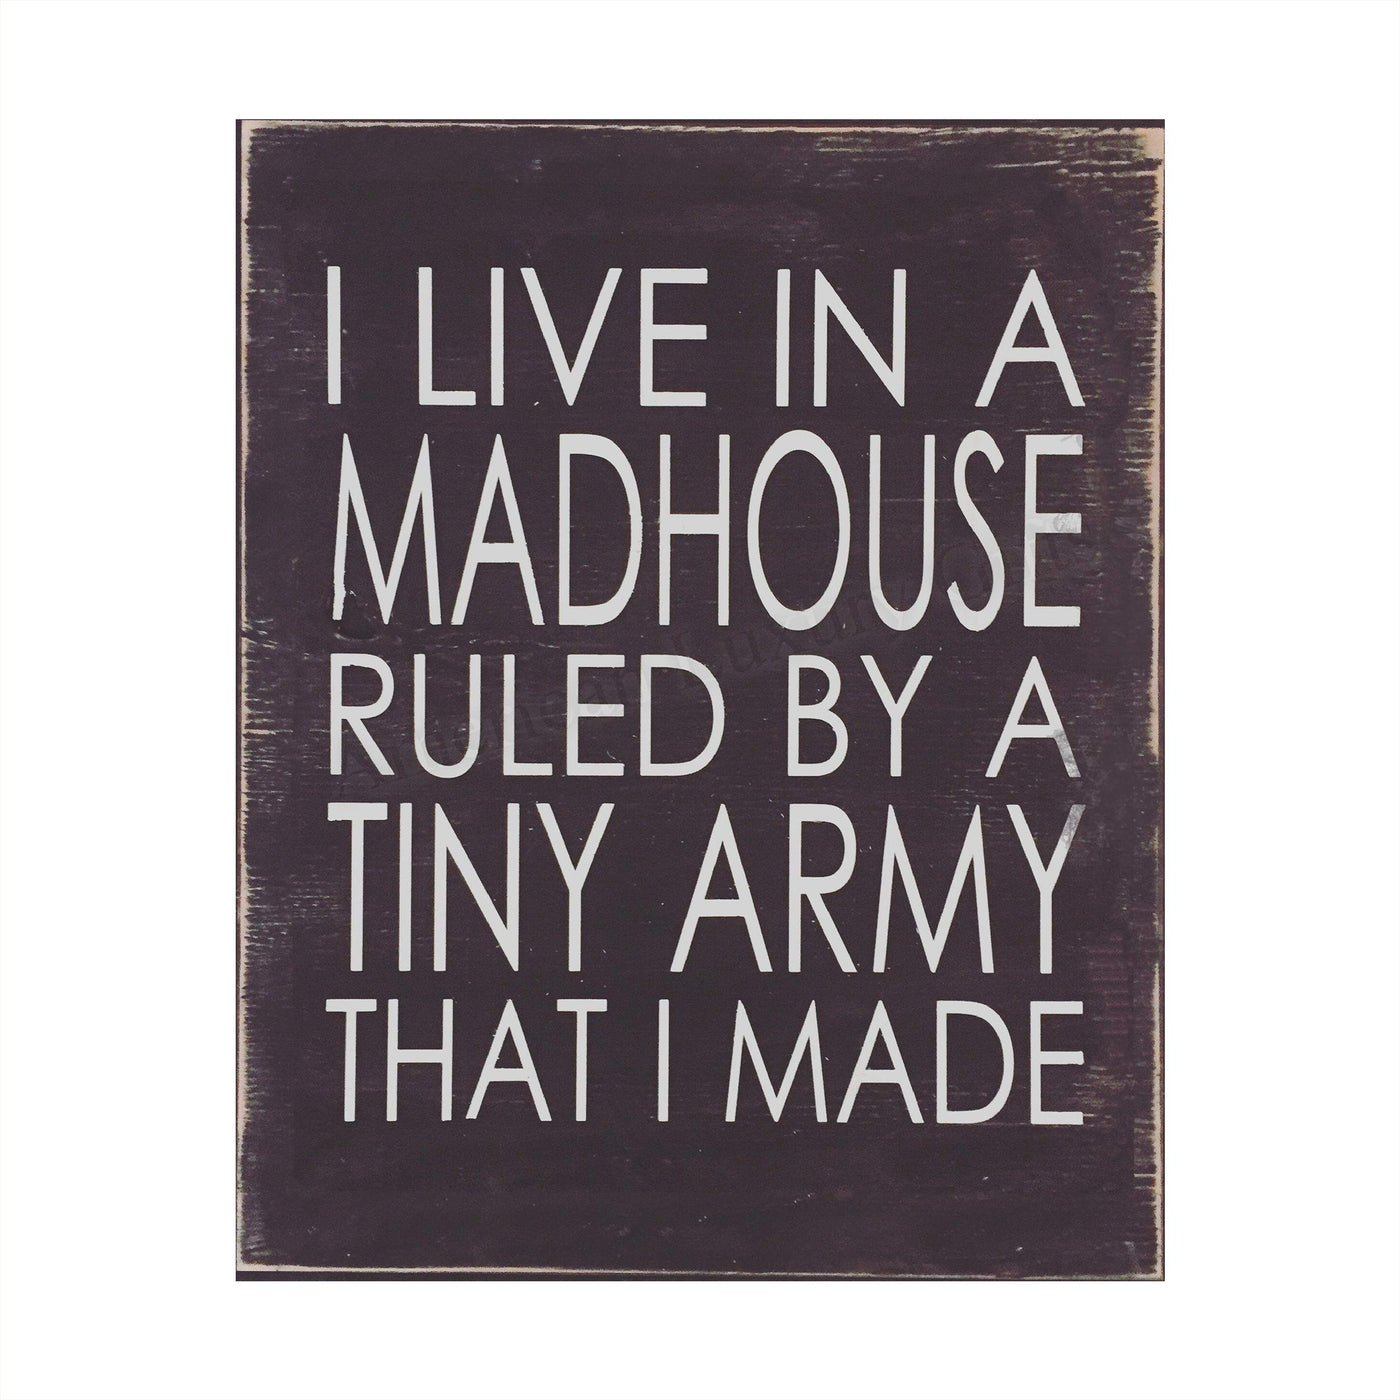 I Live In A Madhouse Ruled By A Tiny Army Funny Wall Sign -8 x 10" Rustic Typographic Art Print-Ready to Frame. Humorous Family Decor for Home-Farmhouse. Great Parenting Sign and Fun Gift for ALL!